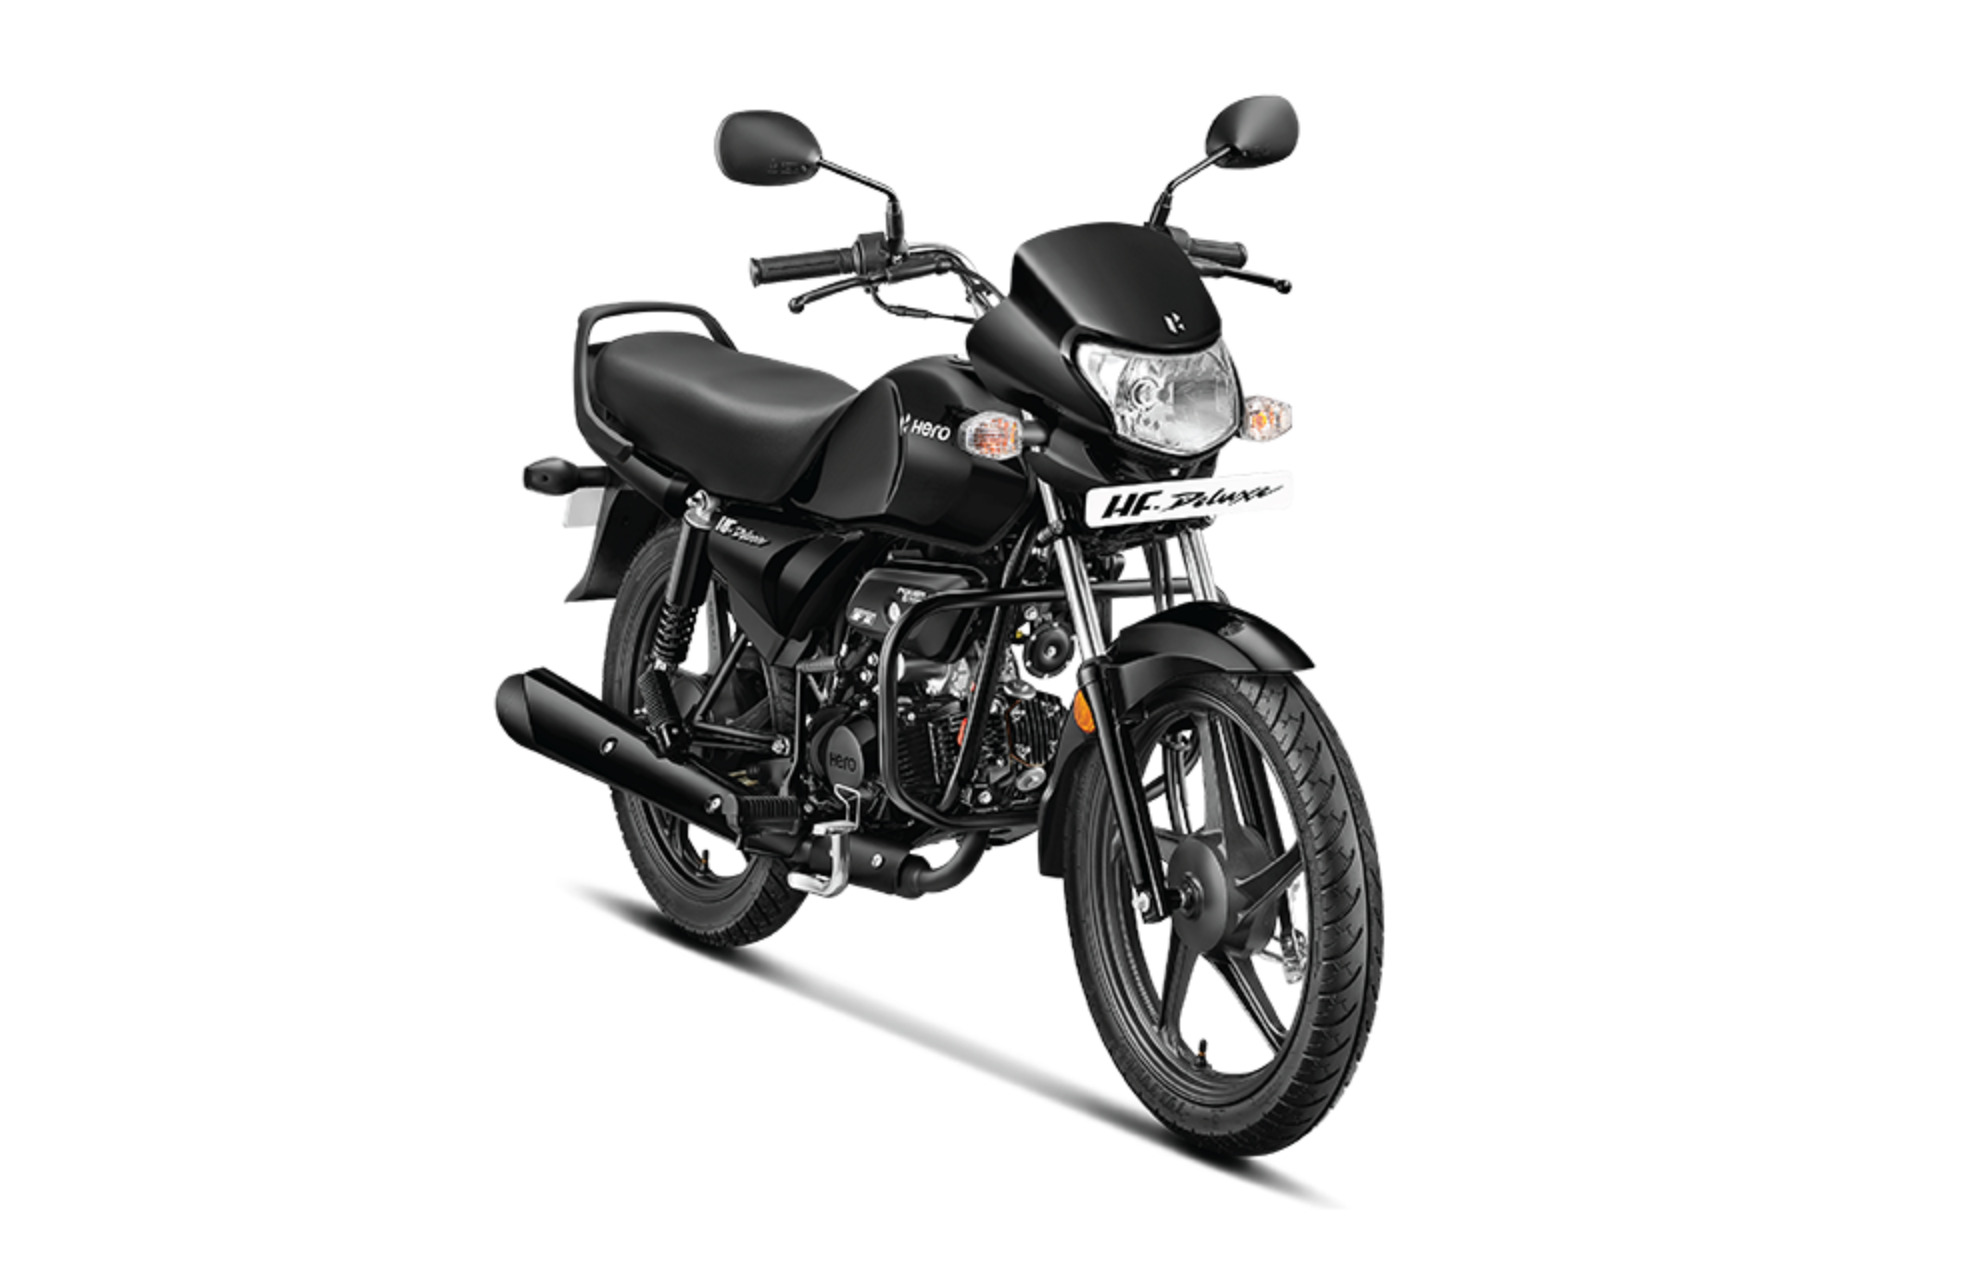 New All-Black Hero HF Deluxe Launched in India at Rs 60,760 - left